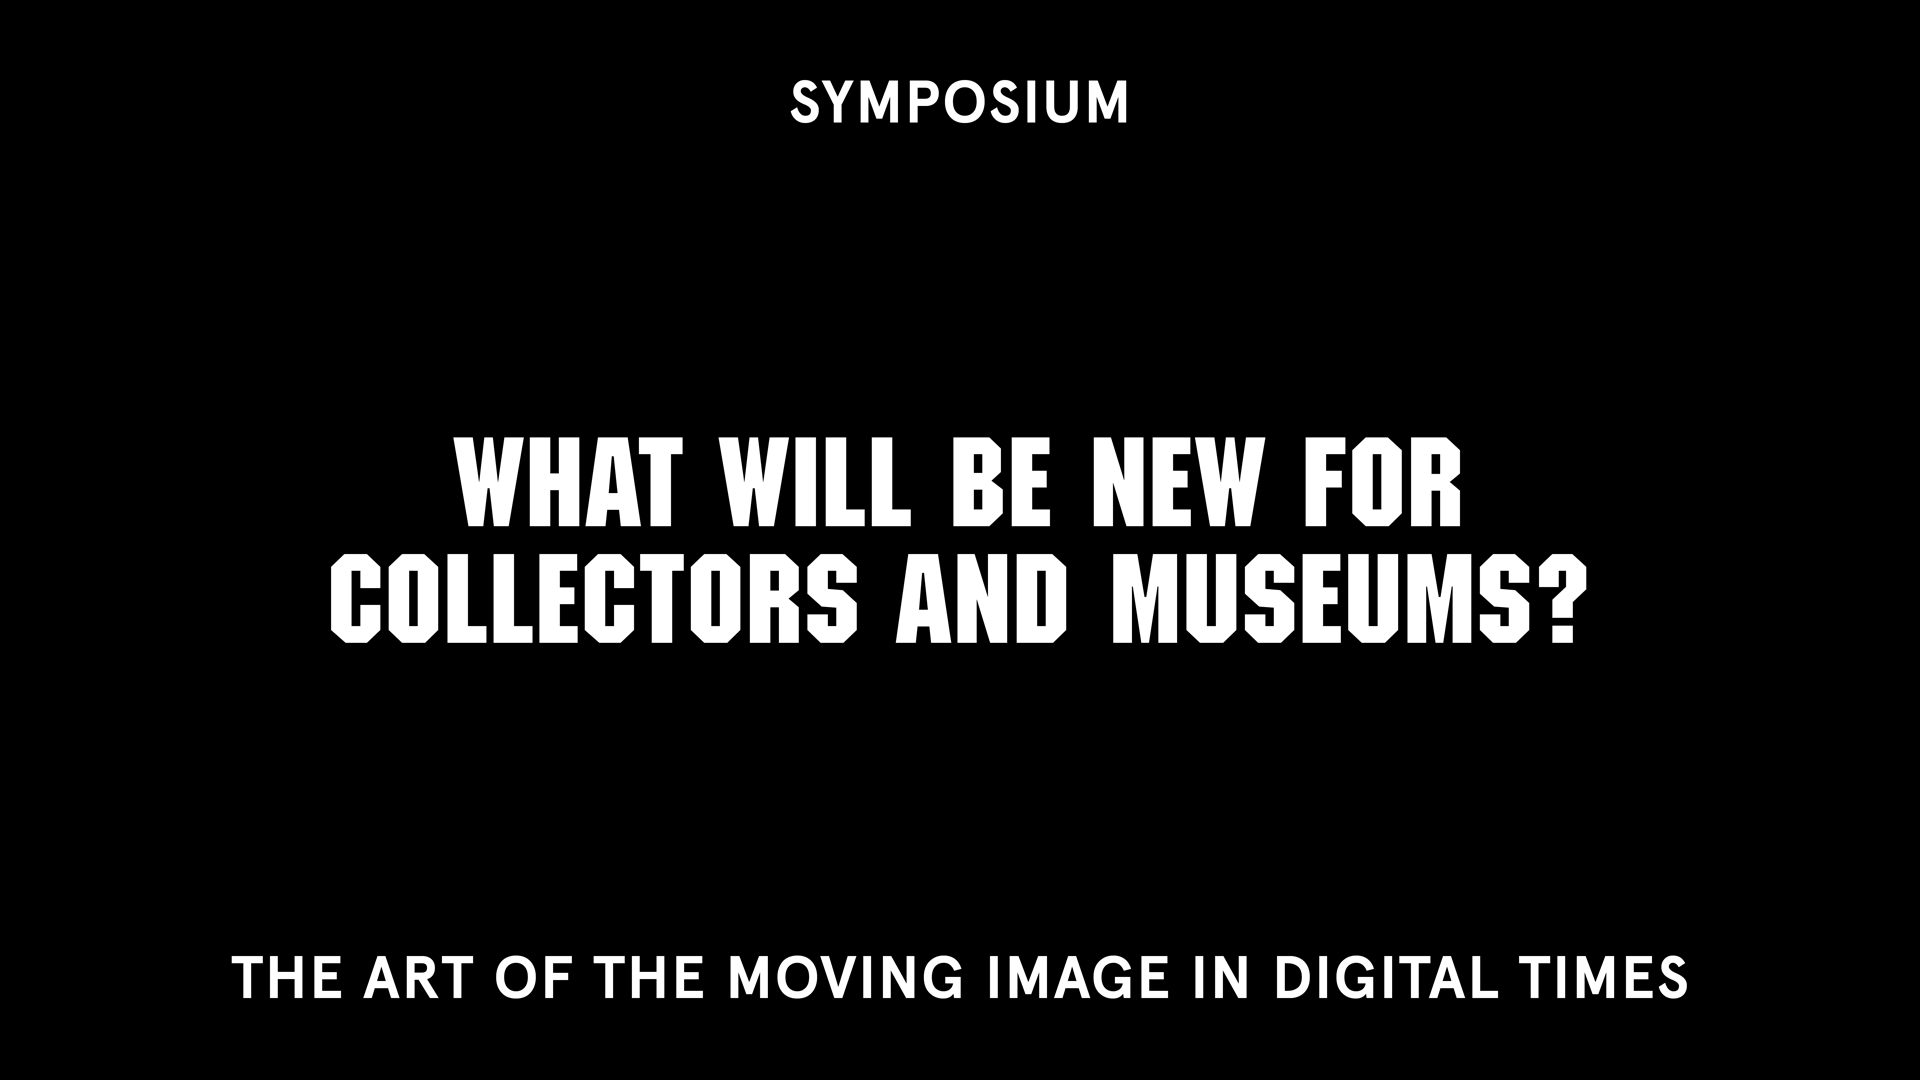 Symposium IV What will be new for collectors and museums?